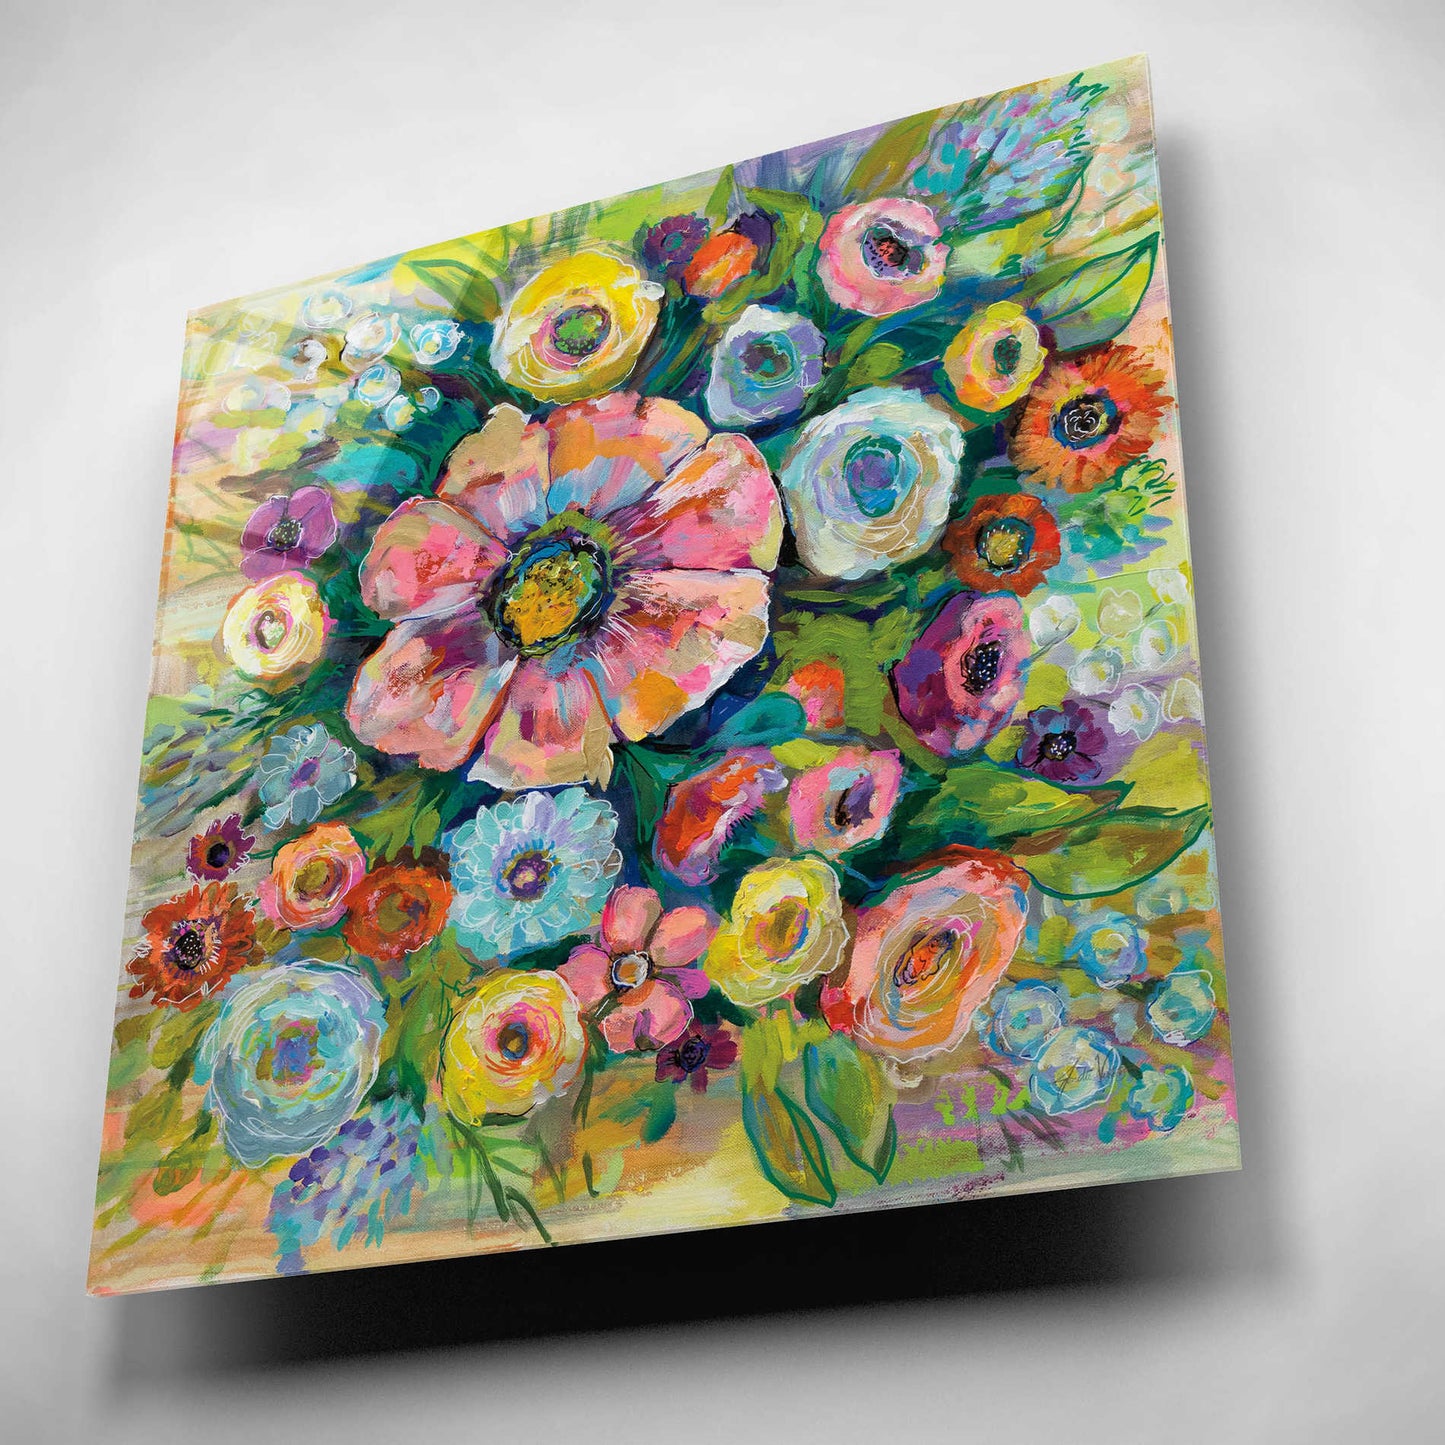 Epic Art 'Floral Fireworks' by Jeanette Vertentes, Acrylic Glass Wall Art,12x12